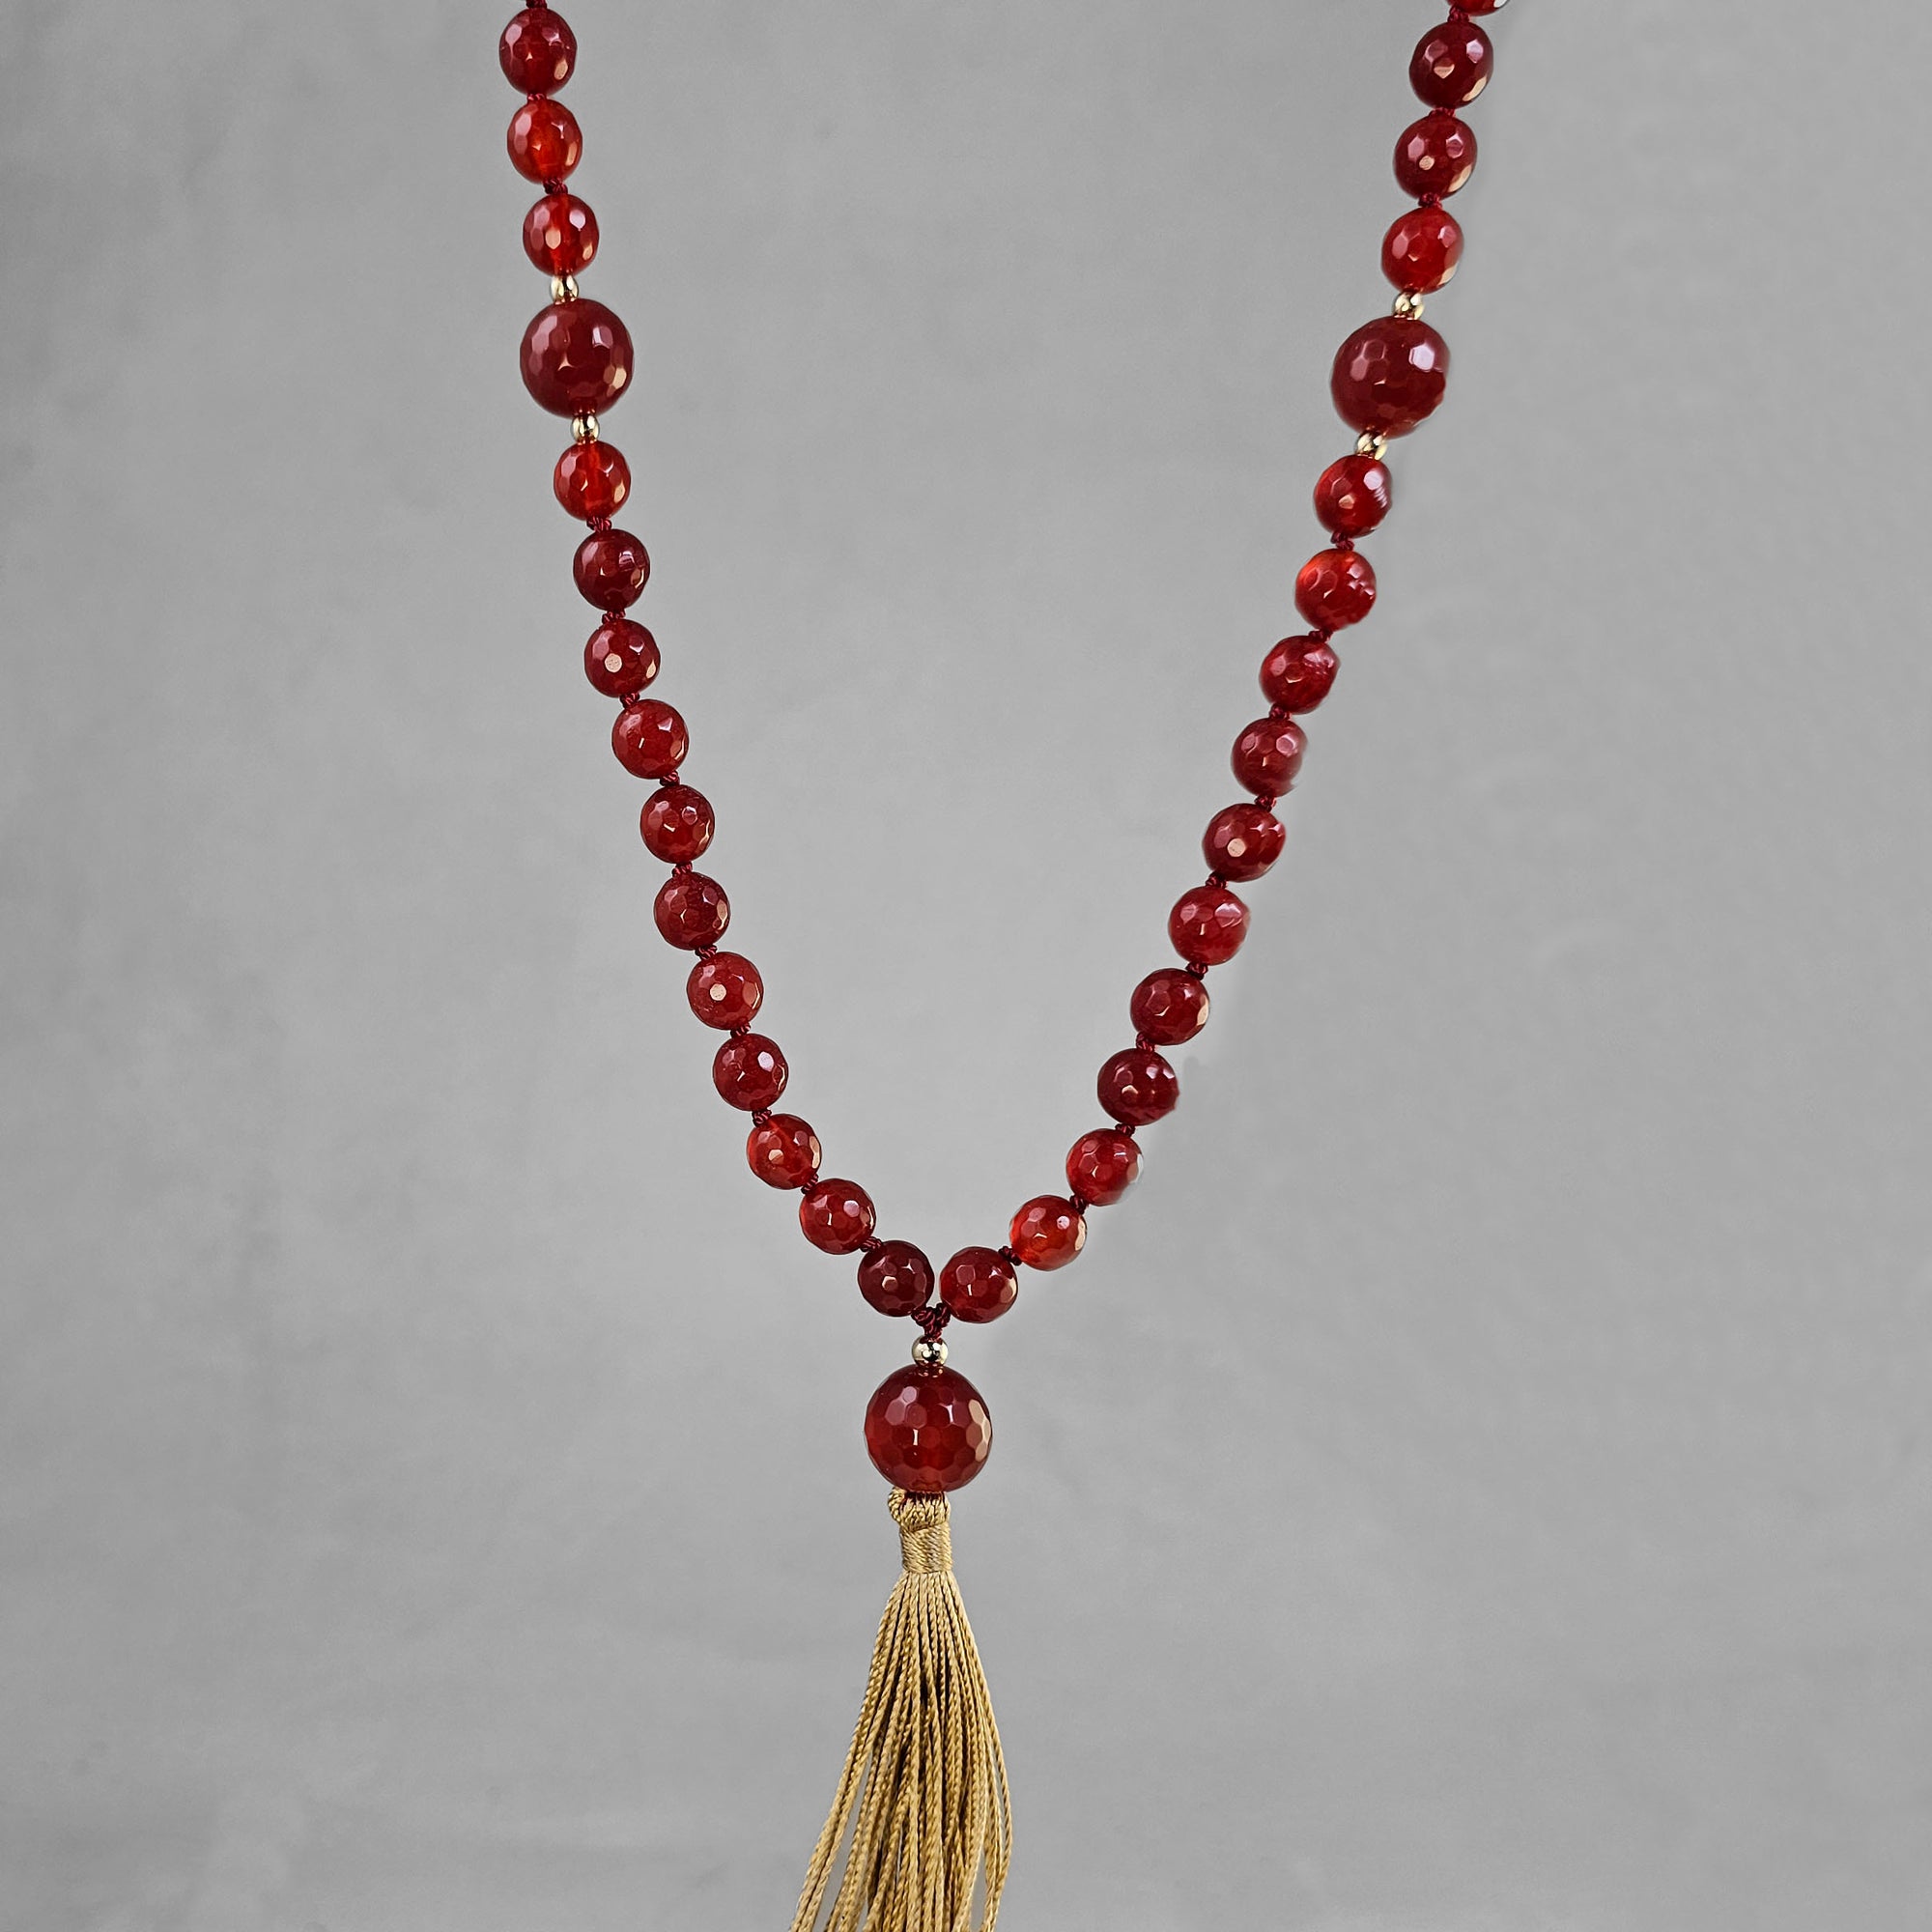 Mars Mala - Faceted Carnelian Beads with Gold Filled Accents